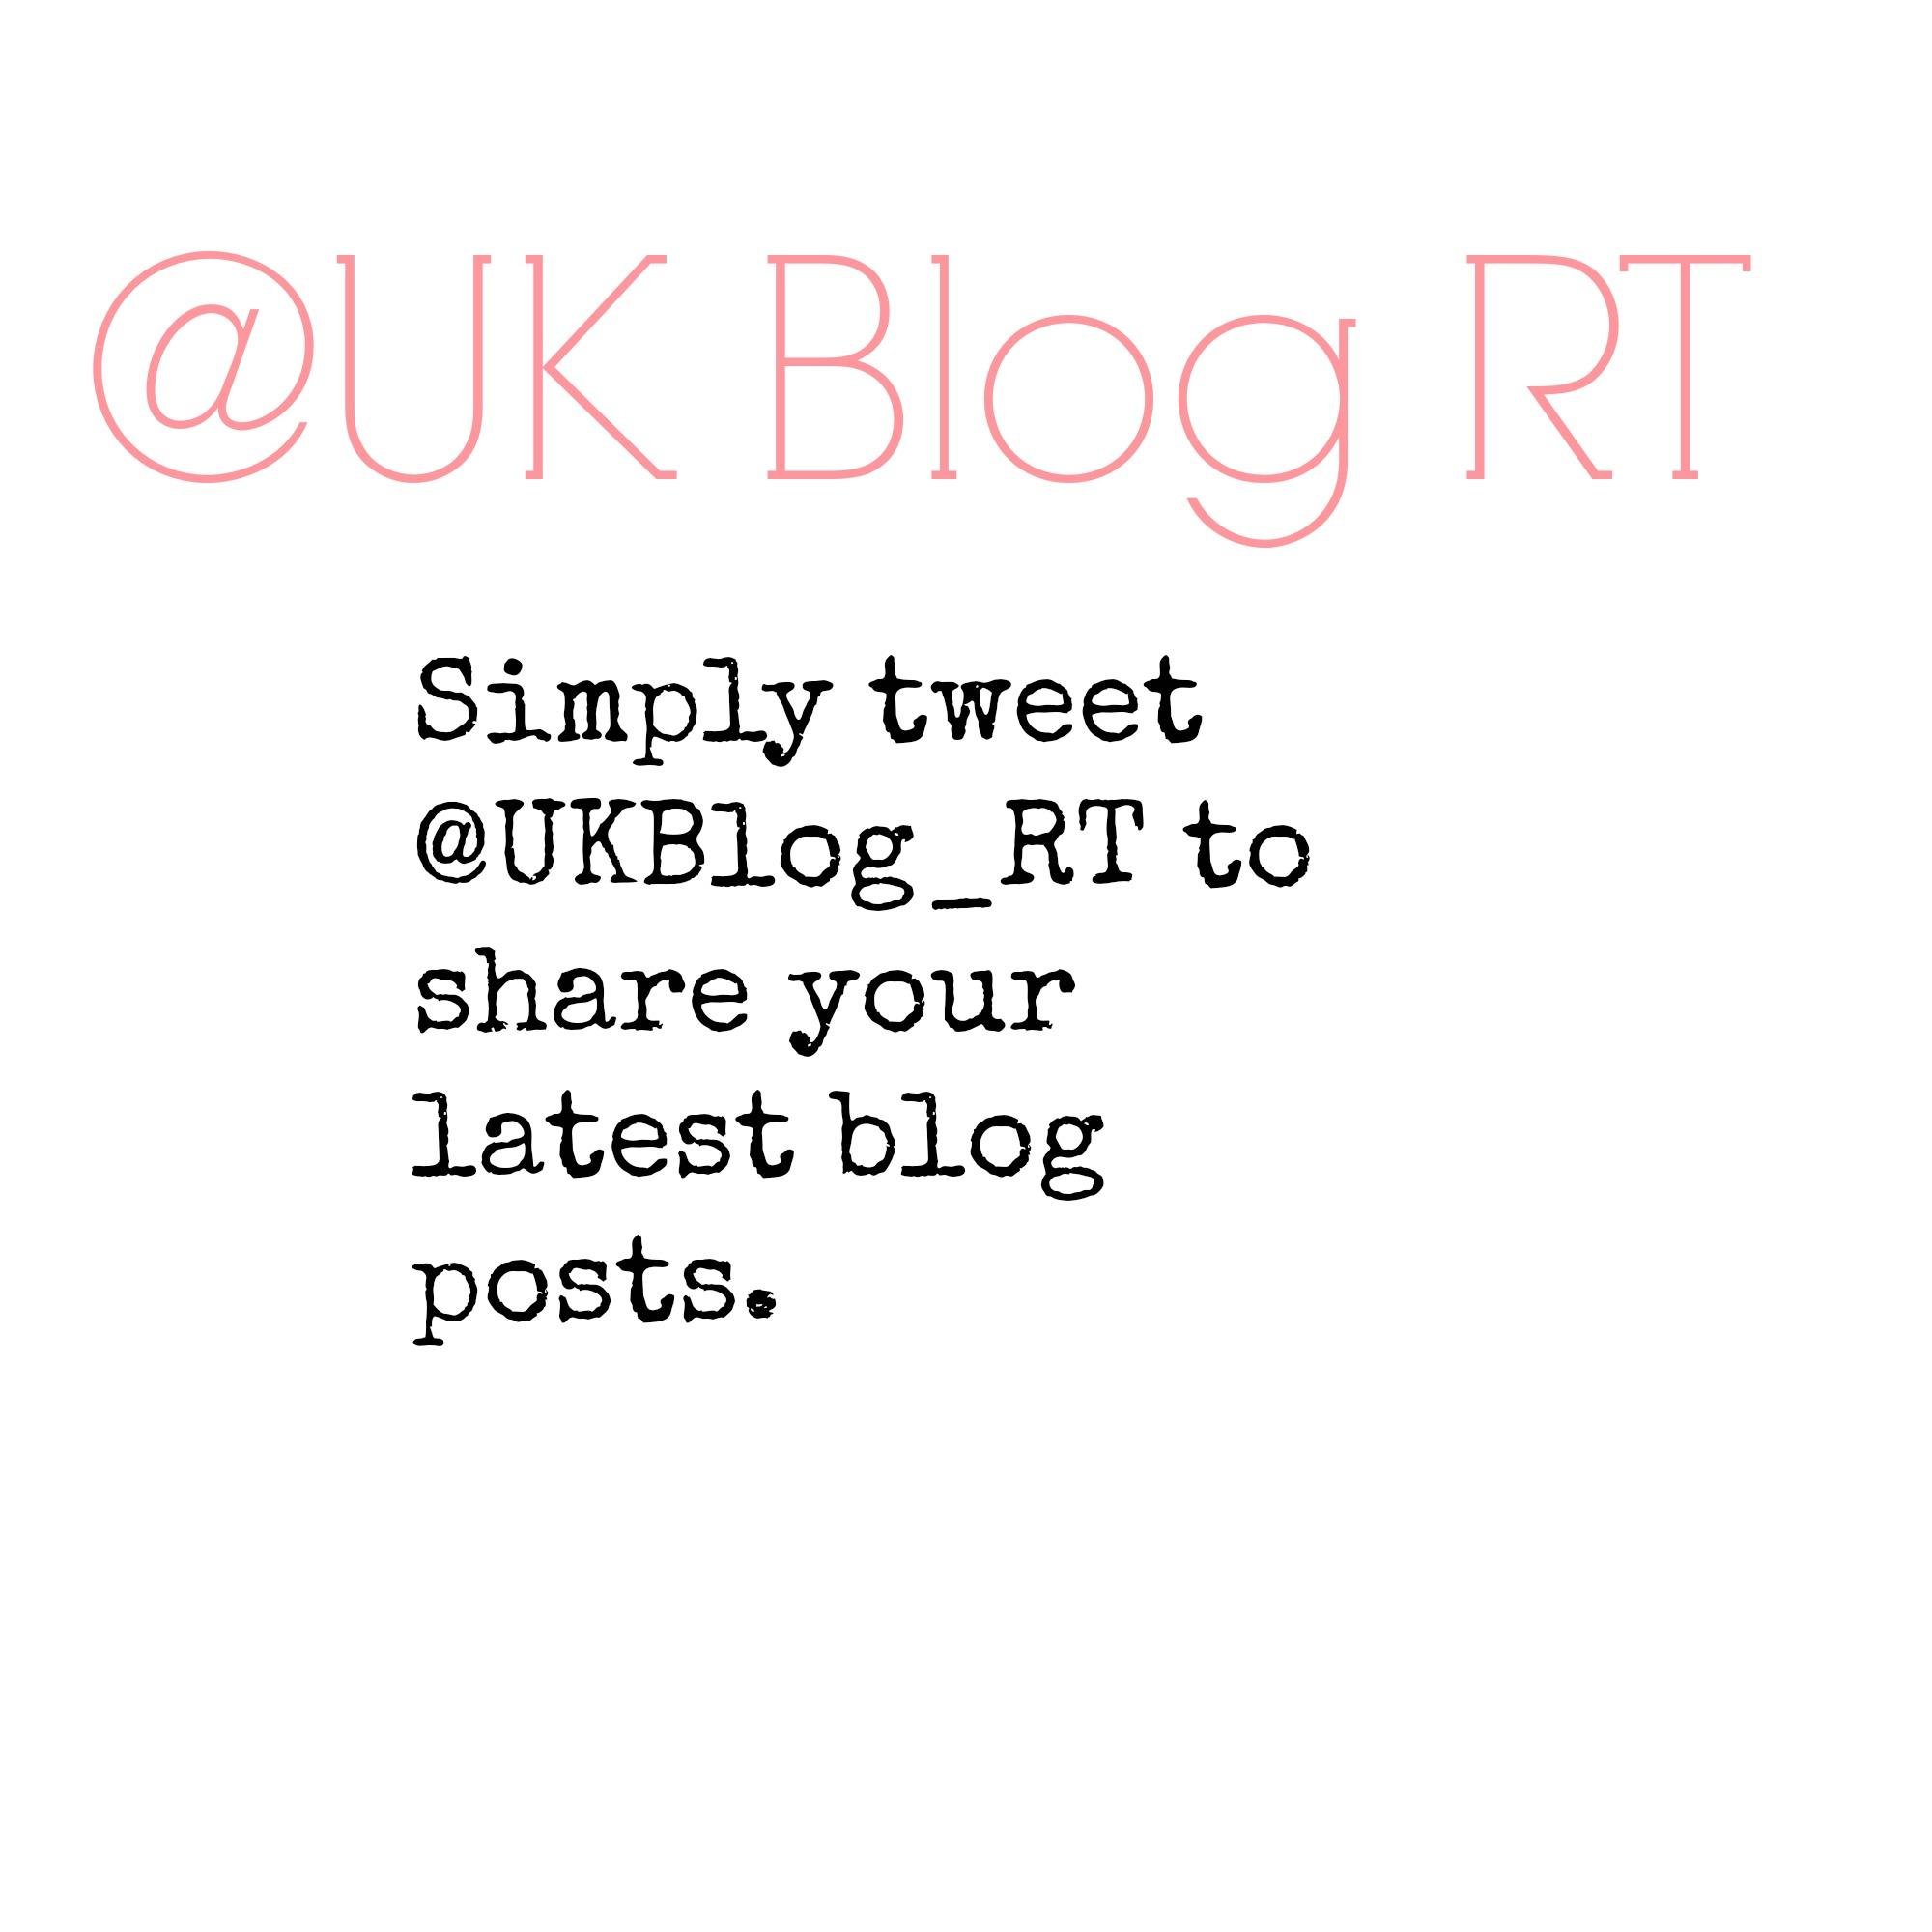 Twitter Account to support UK Bloggers. Will Retweet any blog tweets to @UKBlog_RT .